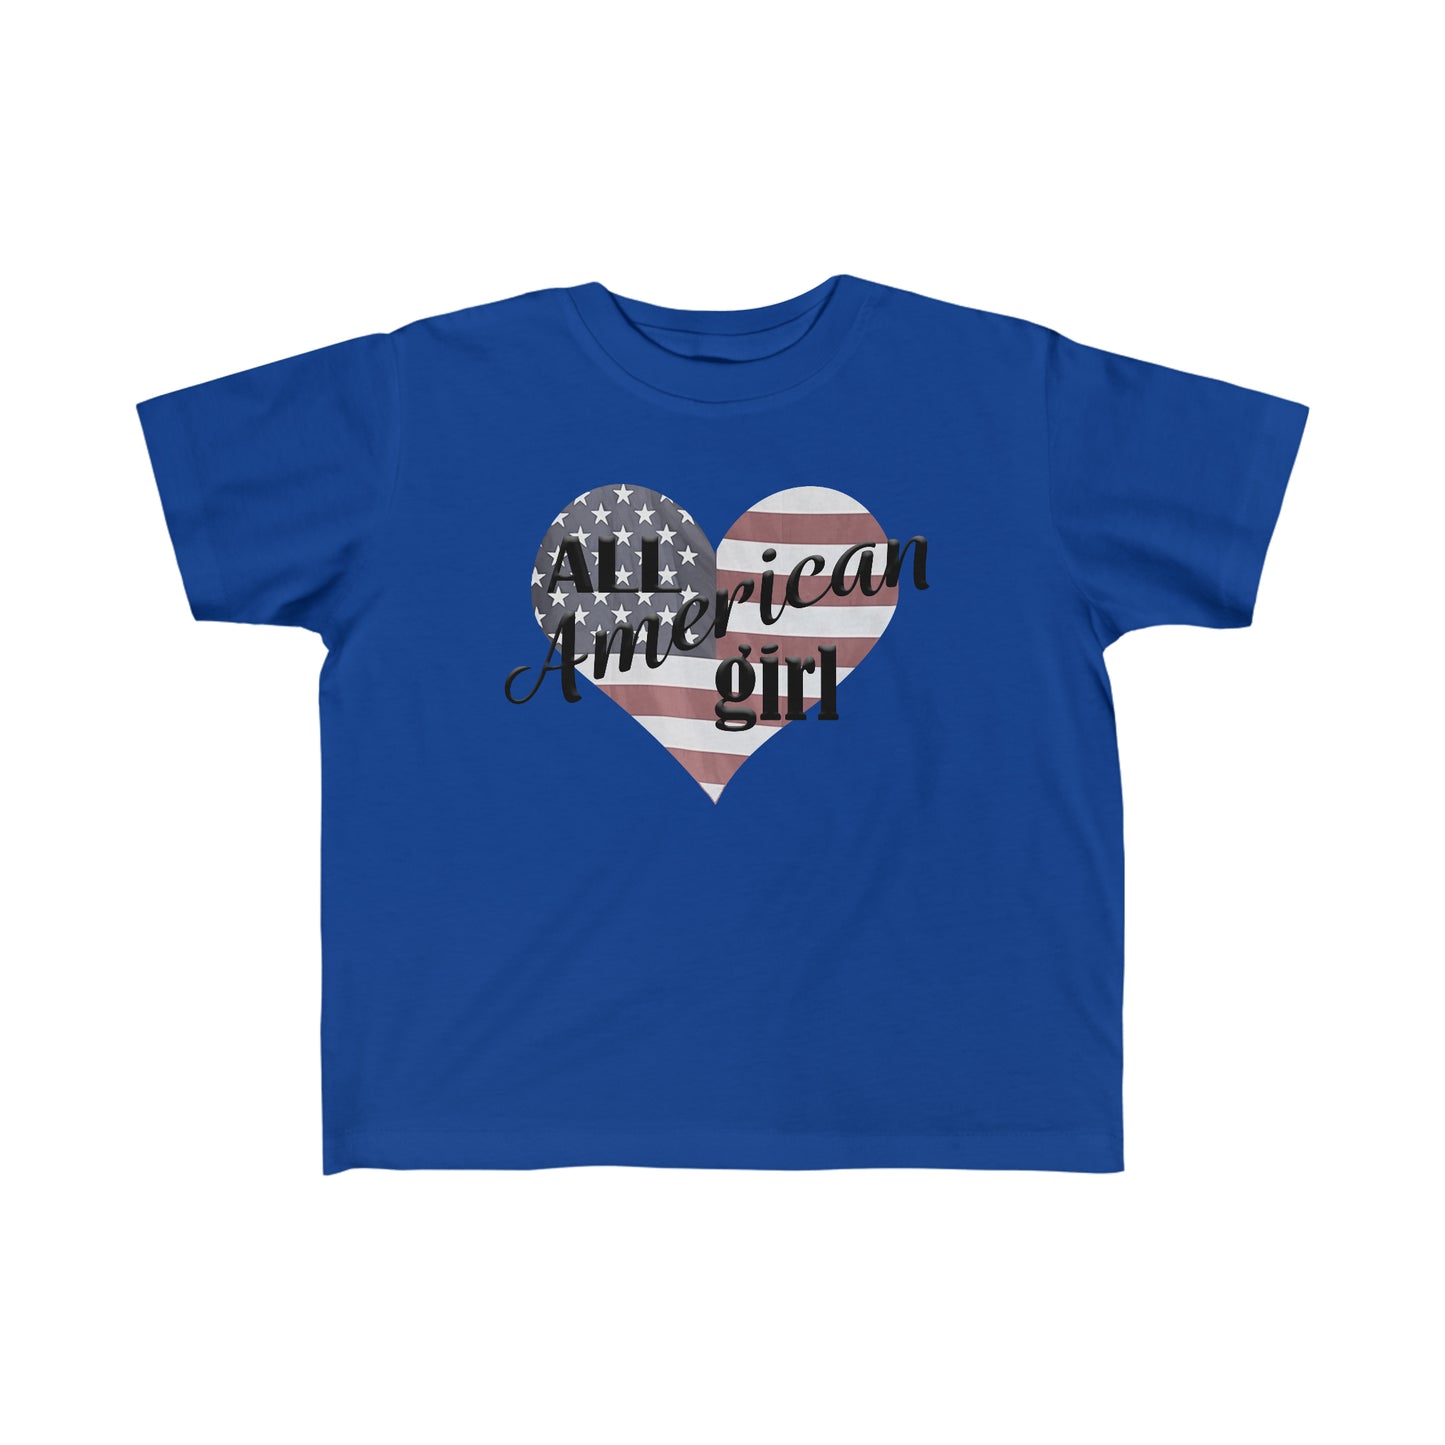 "All American Girl" Fine Jersey Toddler Tee